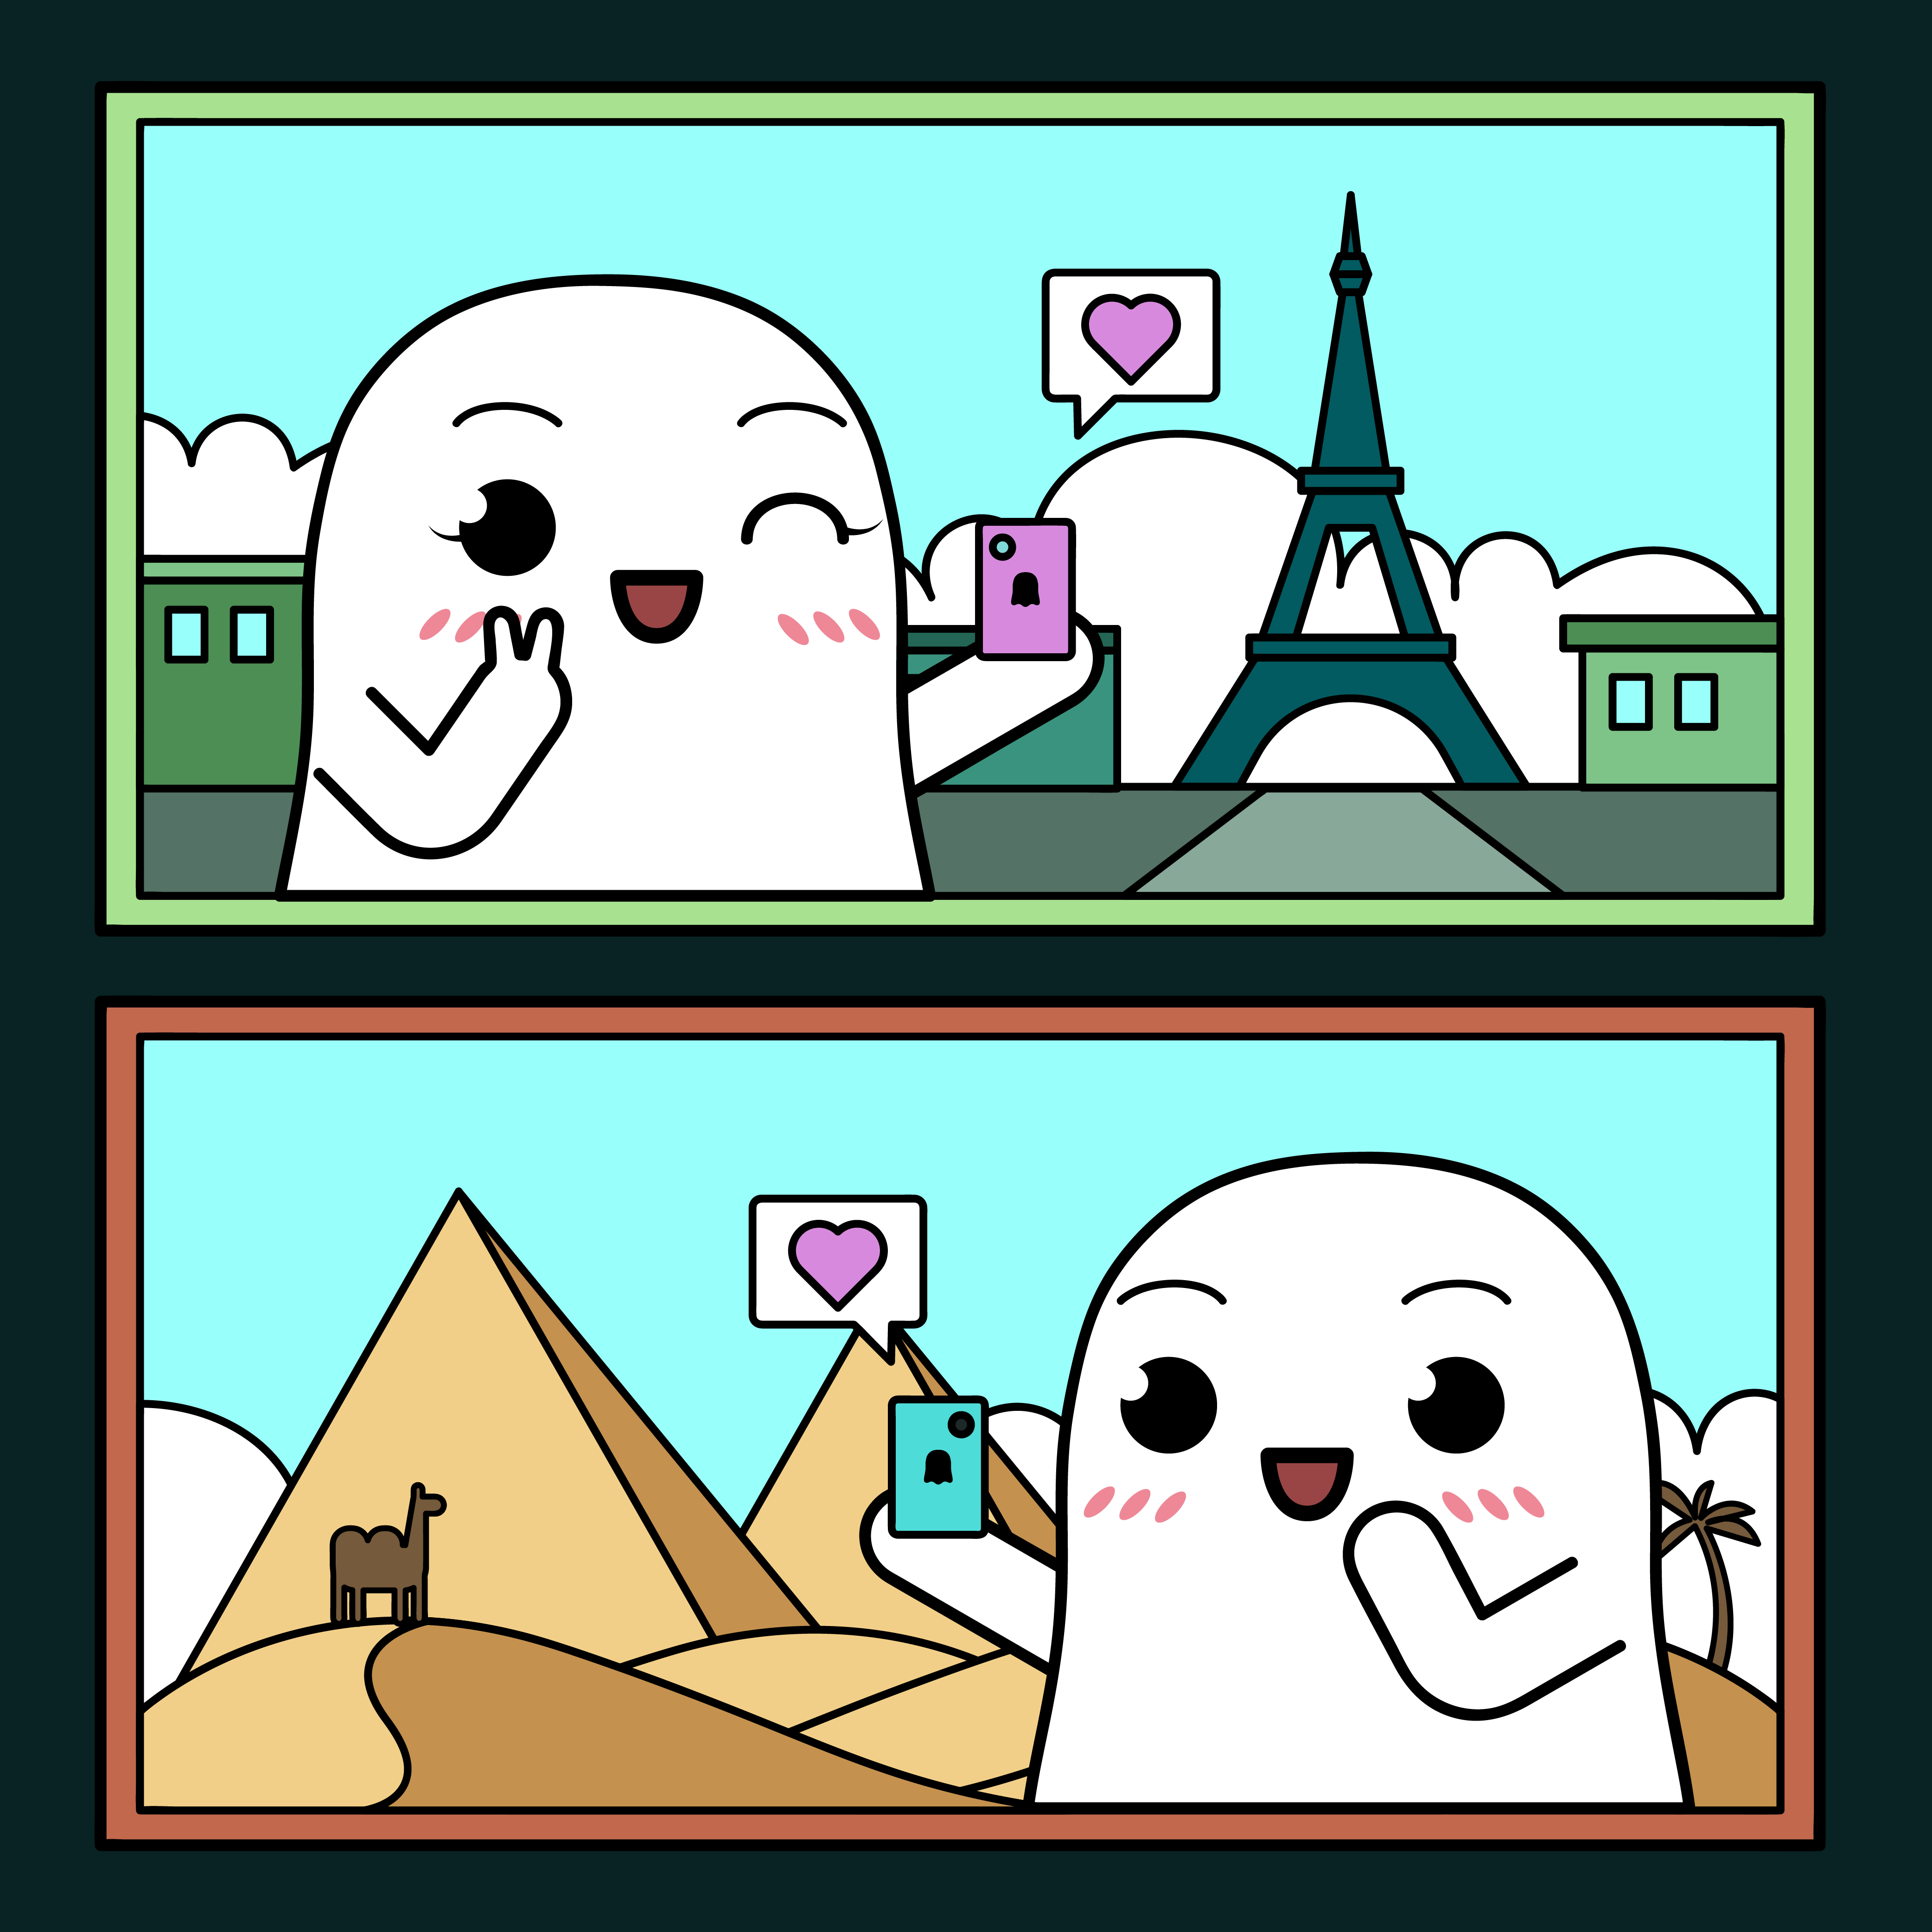  Dating Around the World

A passport to love's diverse expressions across the globe, in this section we explore how location shapes the language of connection.

